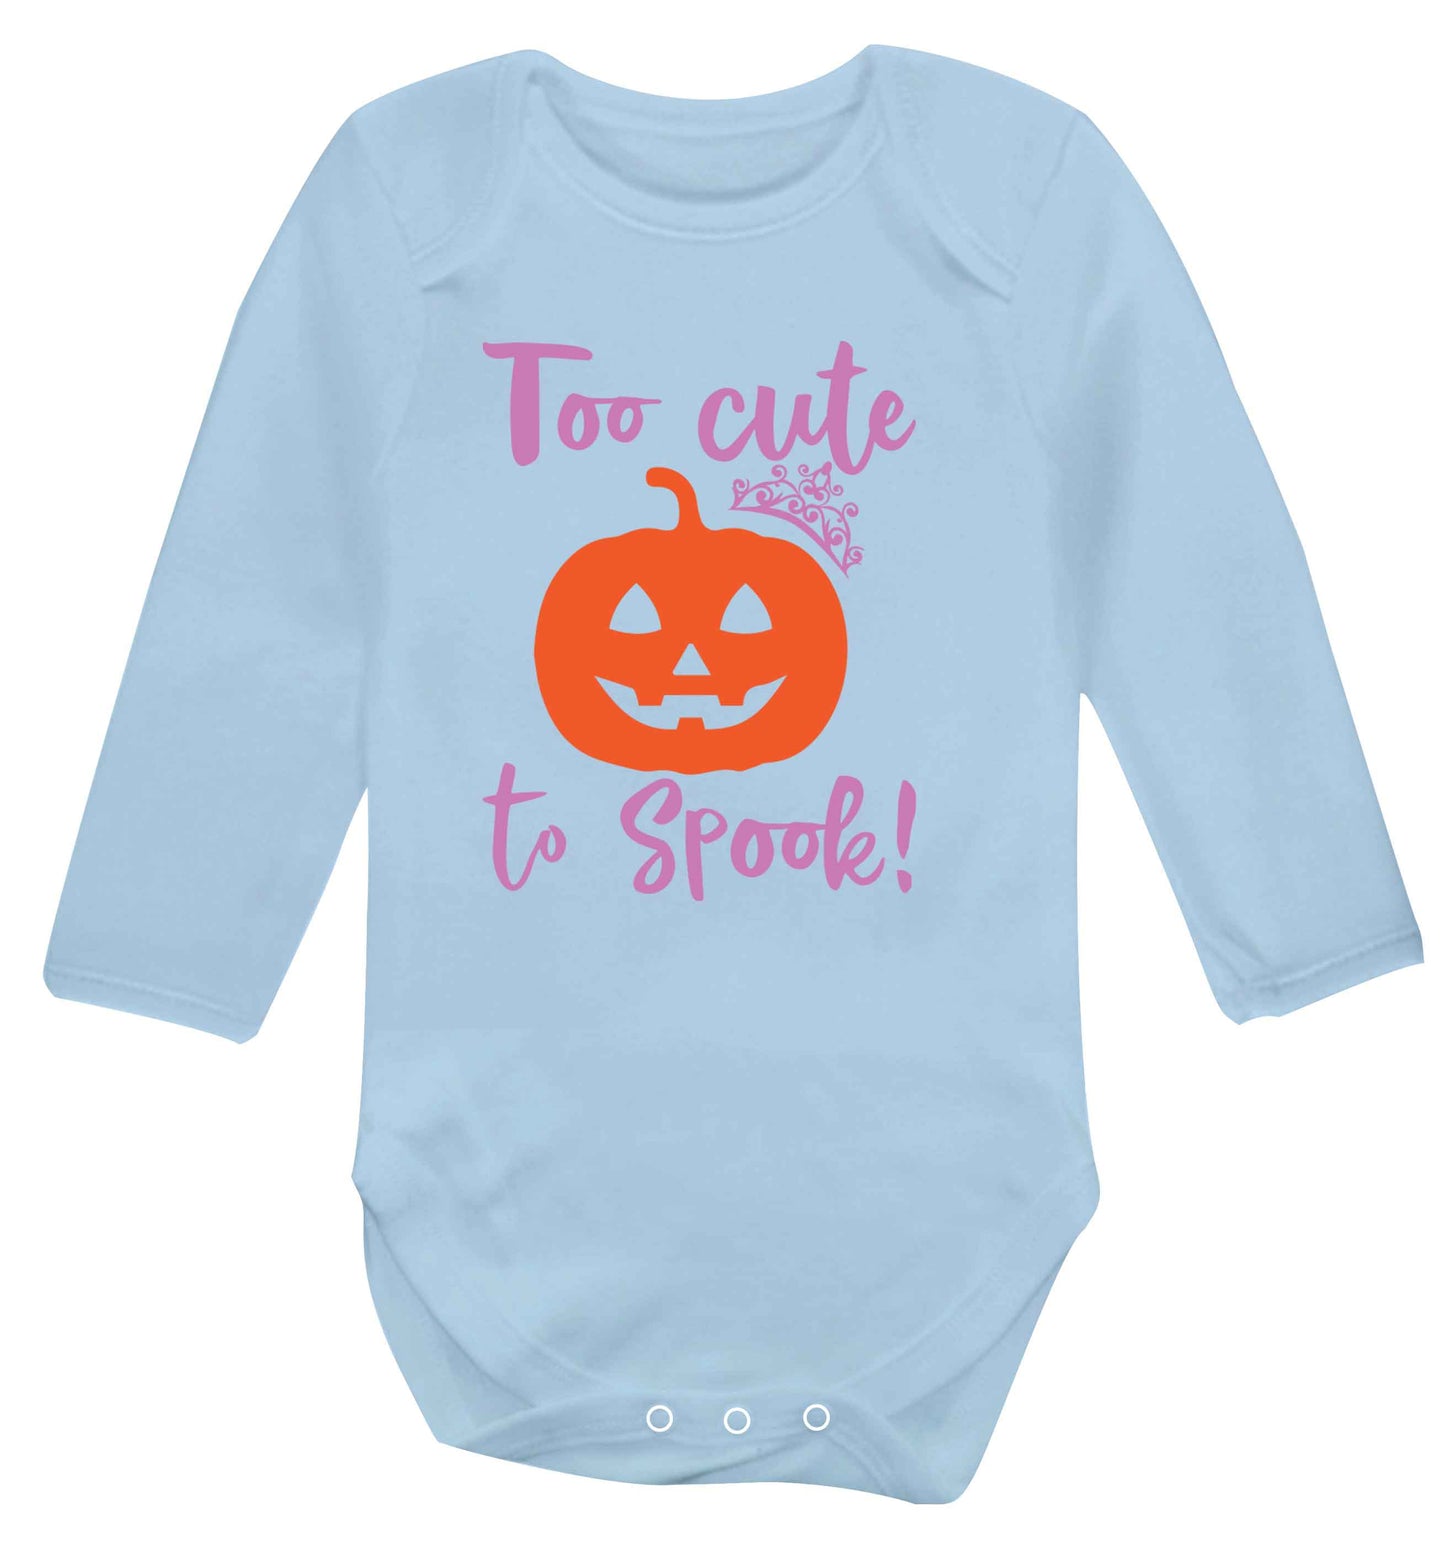 Too cute to spook! Baby Vest long sleeved pale blue 6-12 months